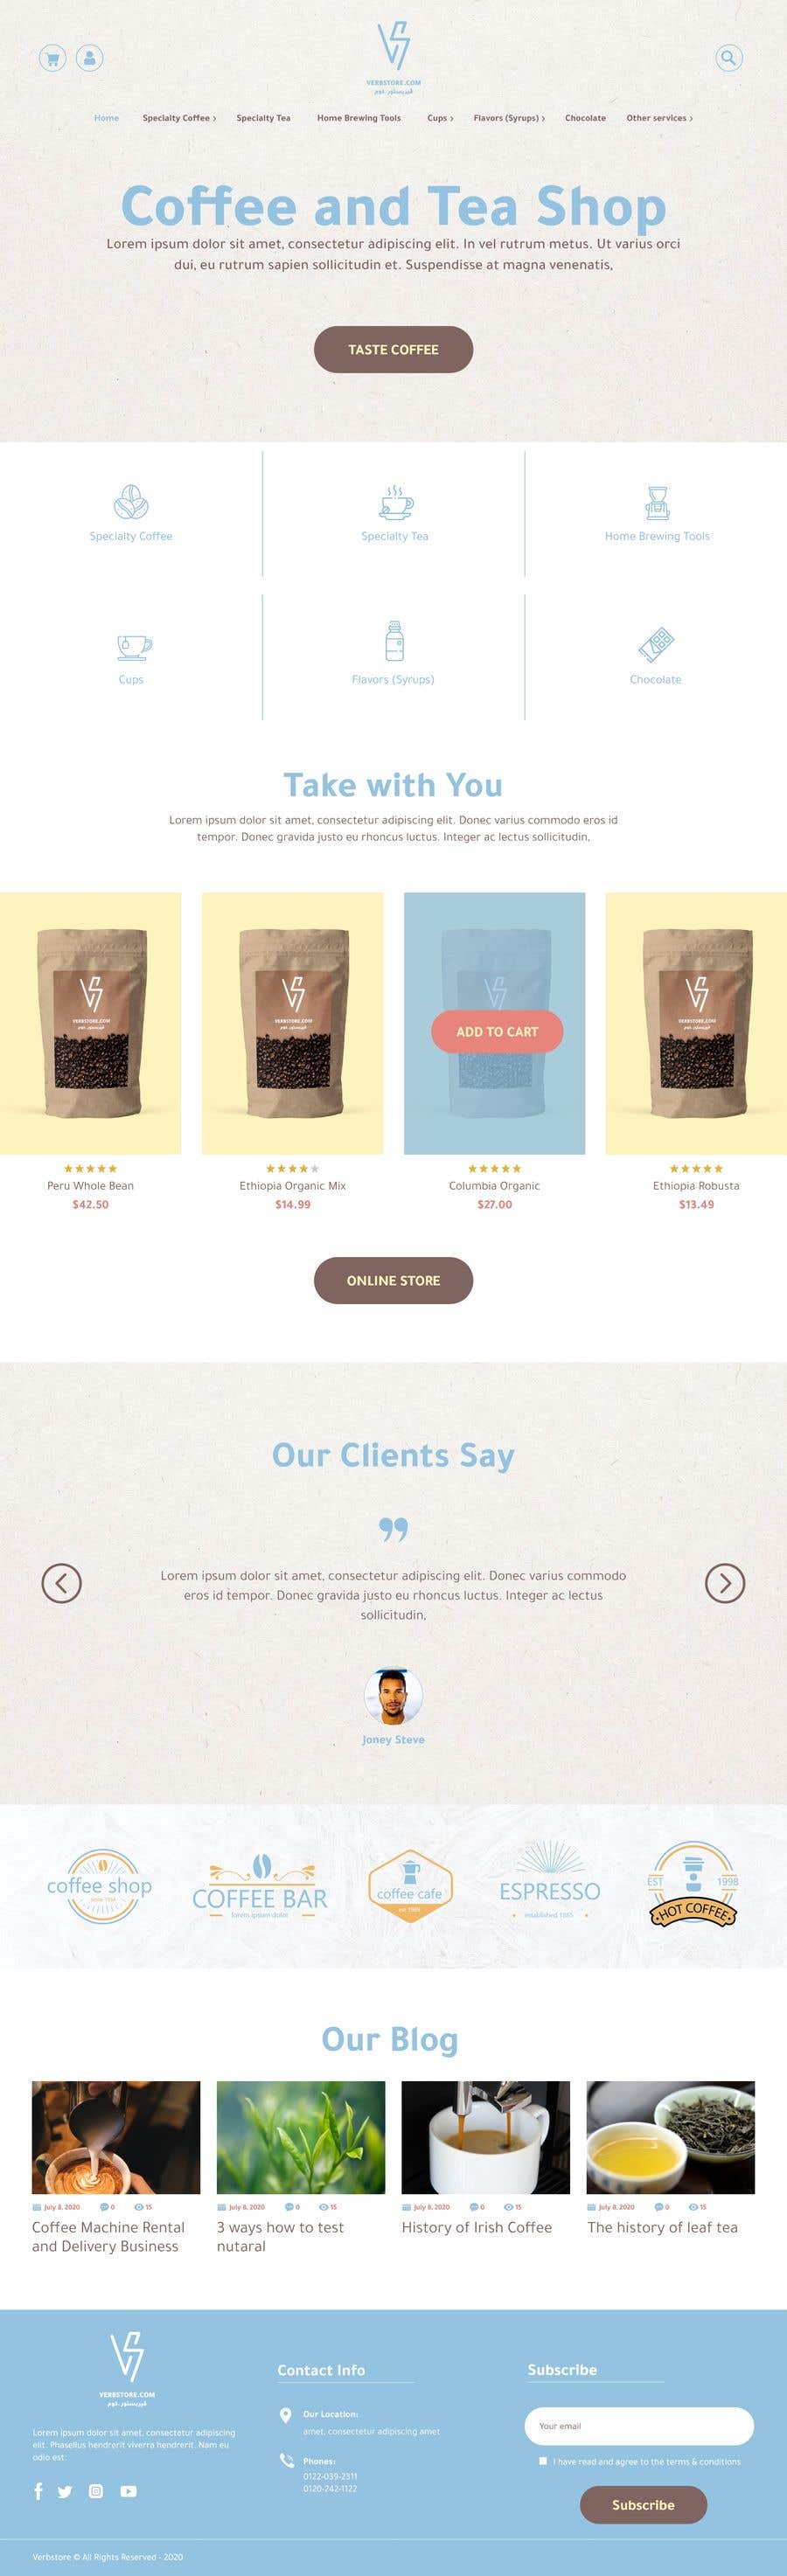 Bài tham dự cuộc thi #57 cho                                                 landing page design for a coffee and tea online store
                                            